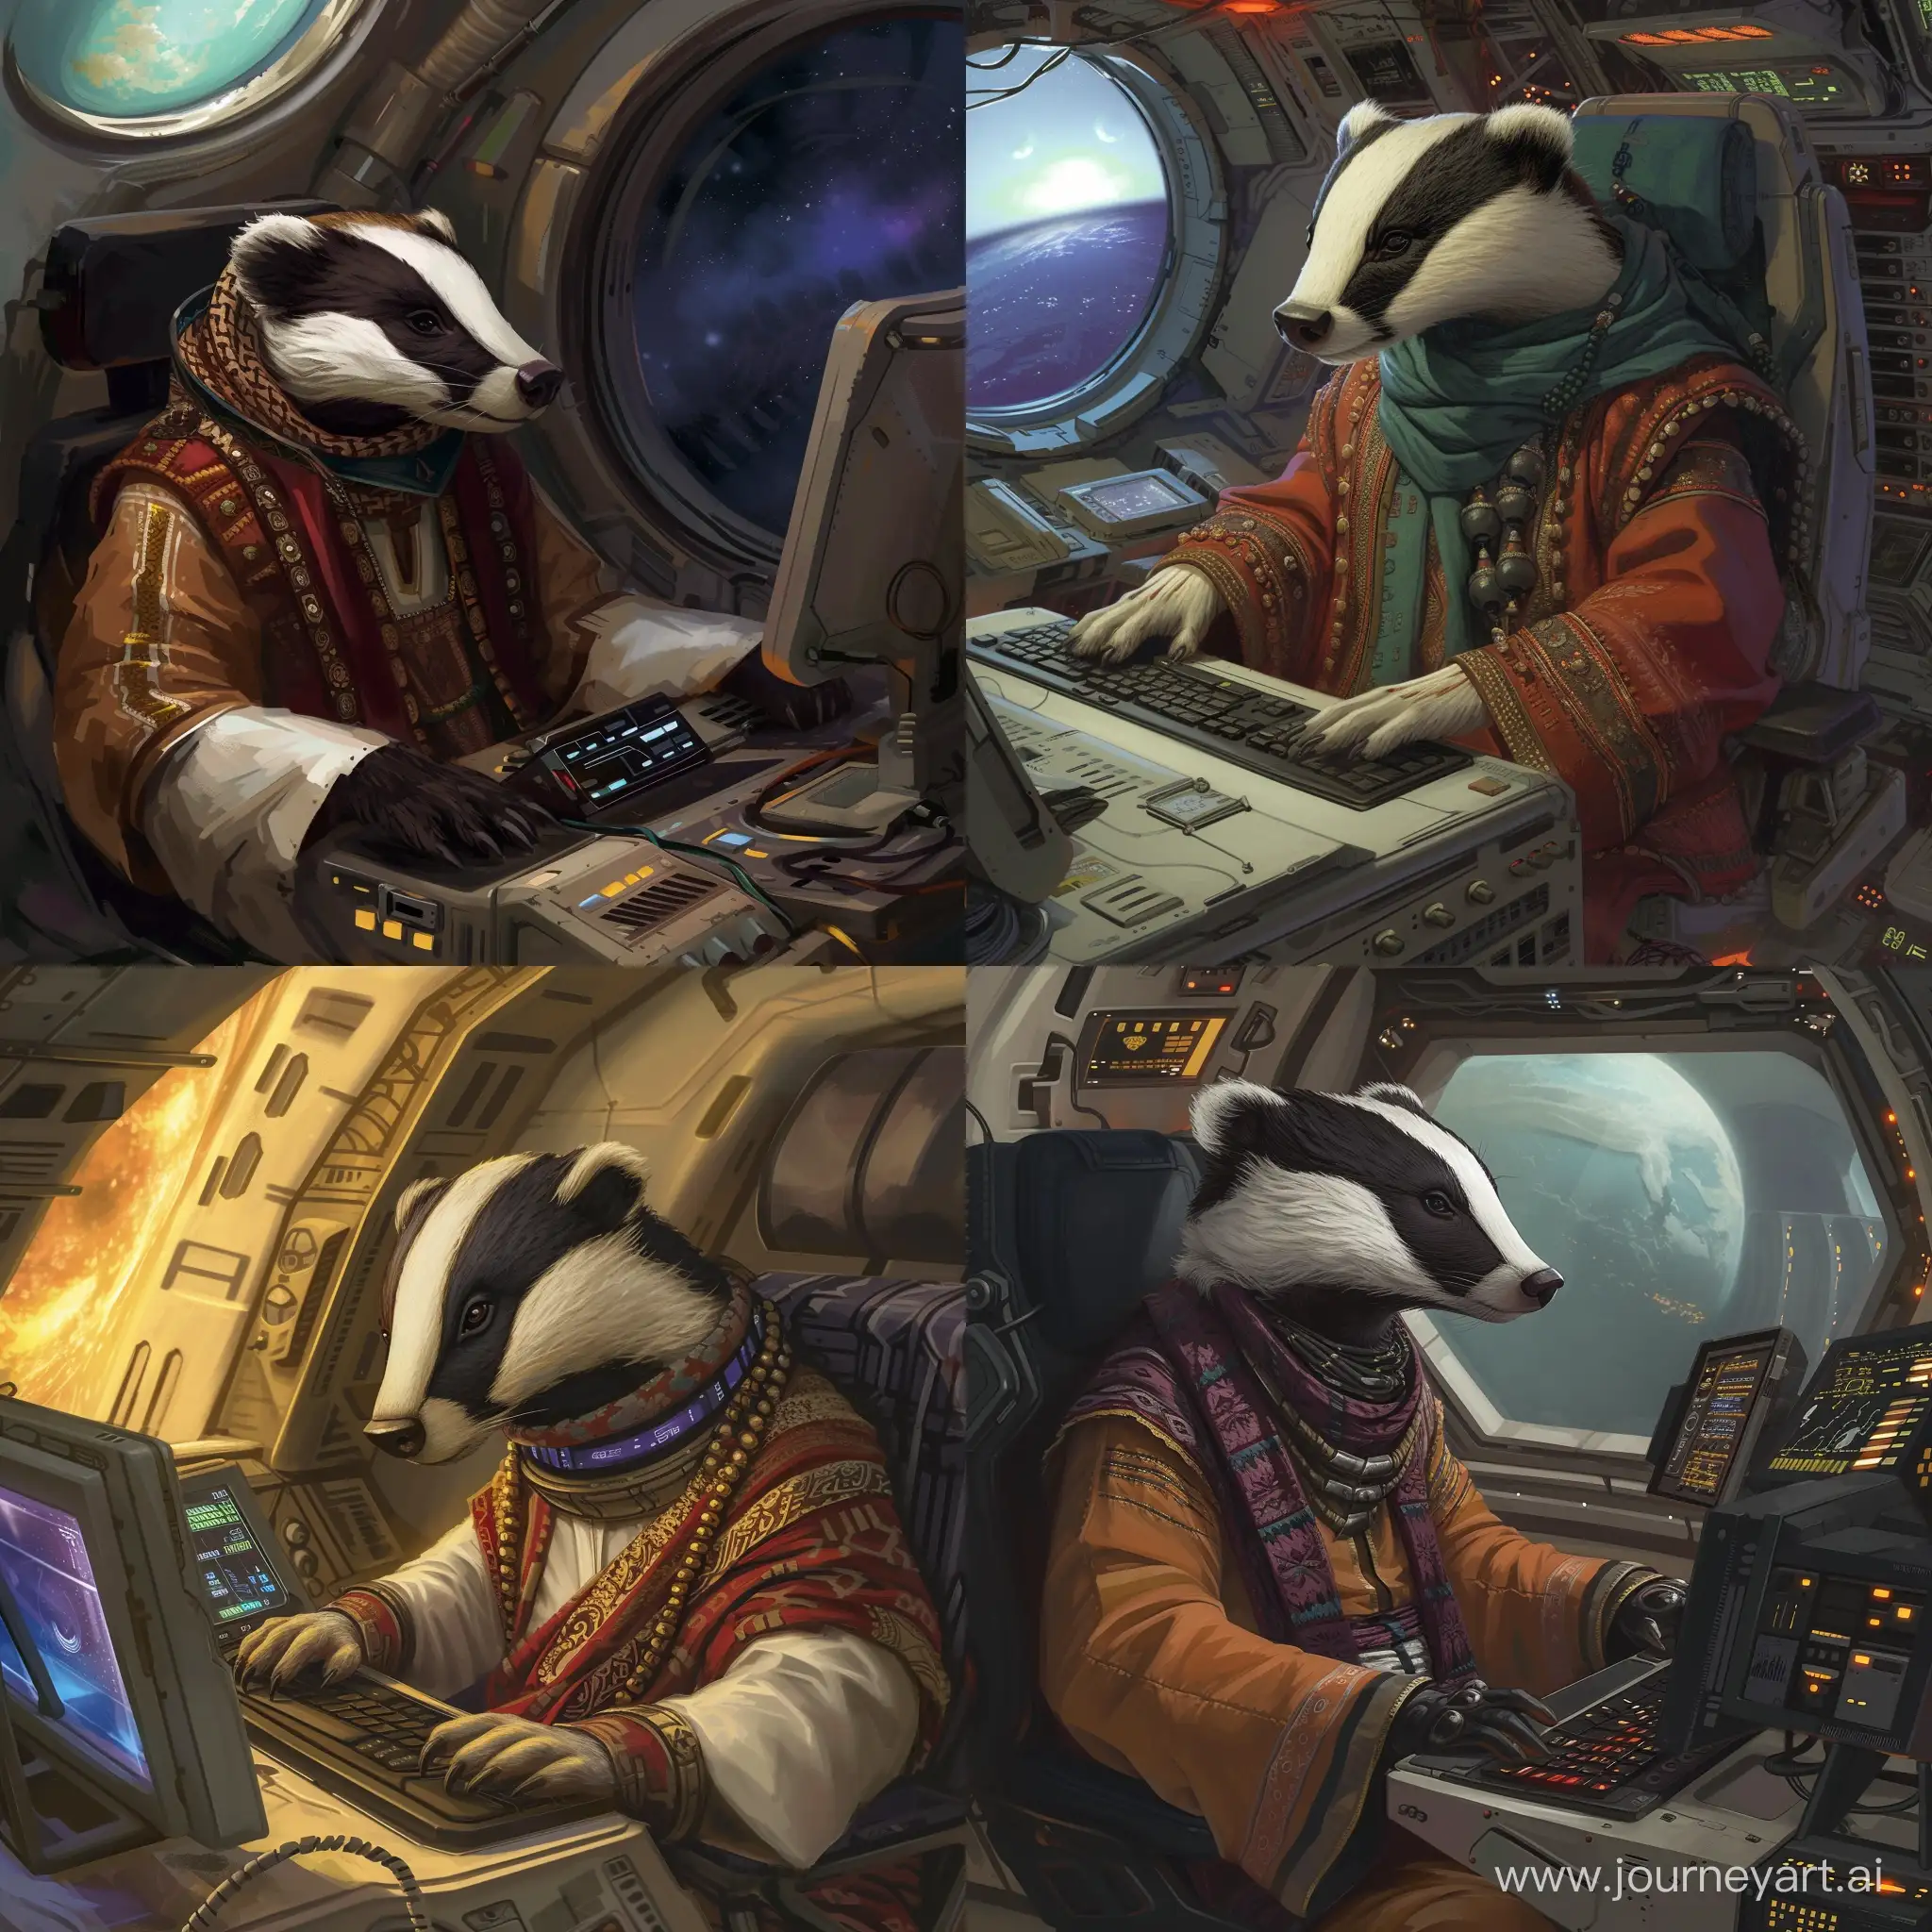 An anthropomorphic badger in Arab clothes, sitting at a computer in a spaceship